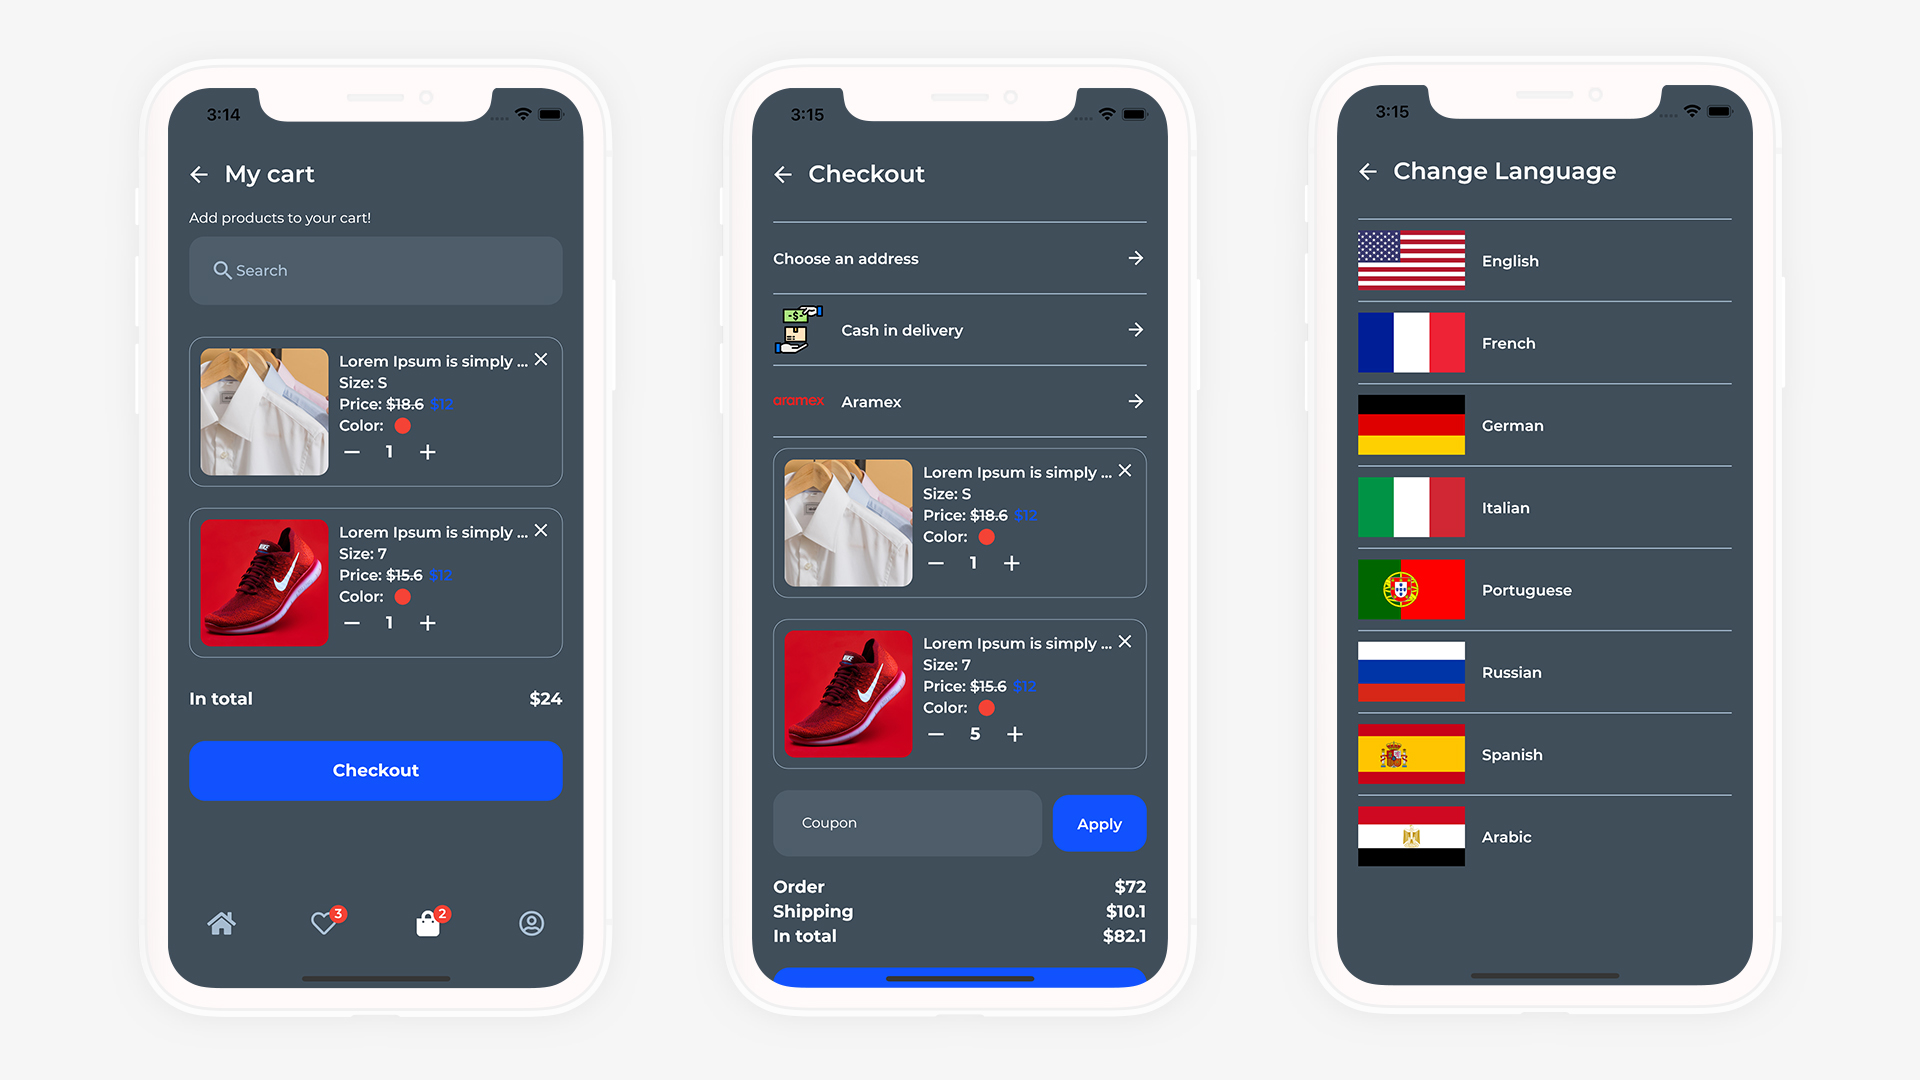 Flutter UI Kit - eCommmerce App for Fashion, Clothes and Sports Brands - 15